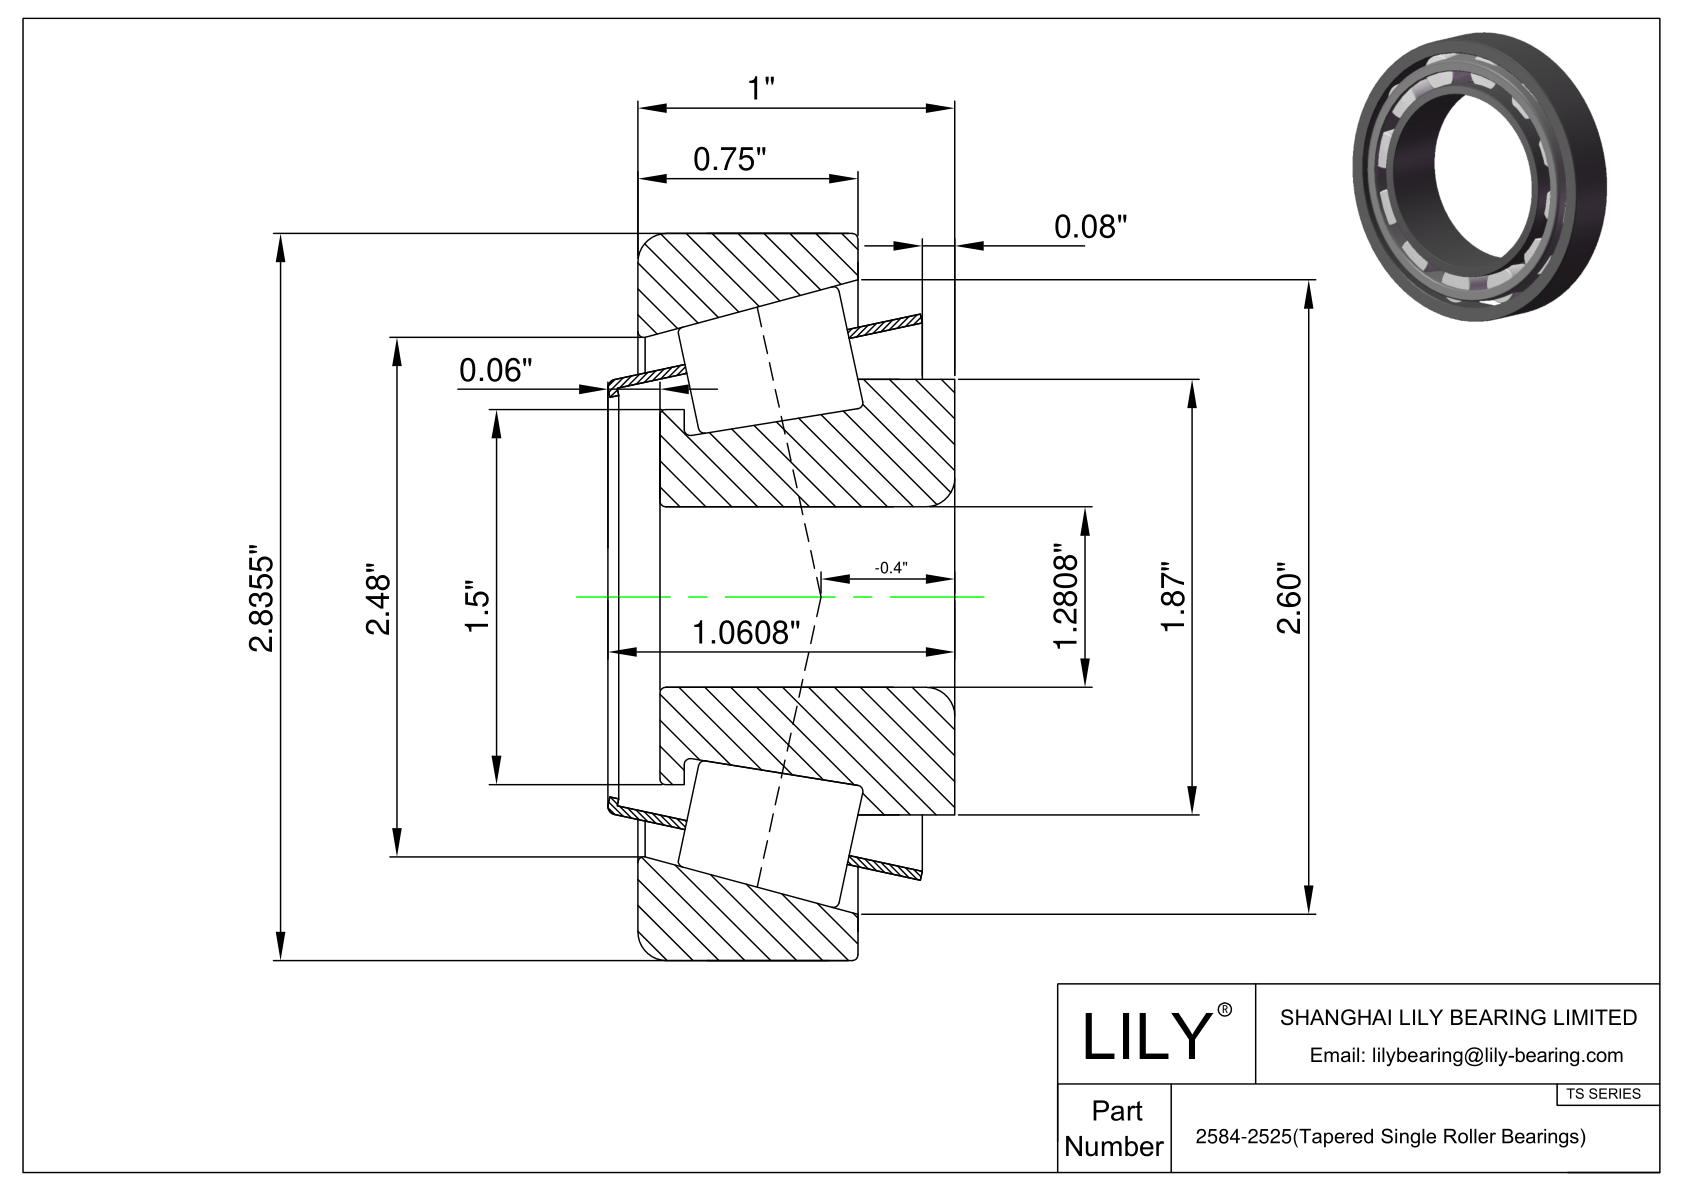 2584-2525 TS (Tapered Single Roller Bearings) (Imperial) cad drawing